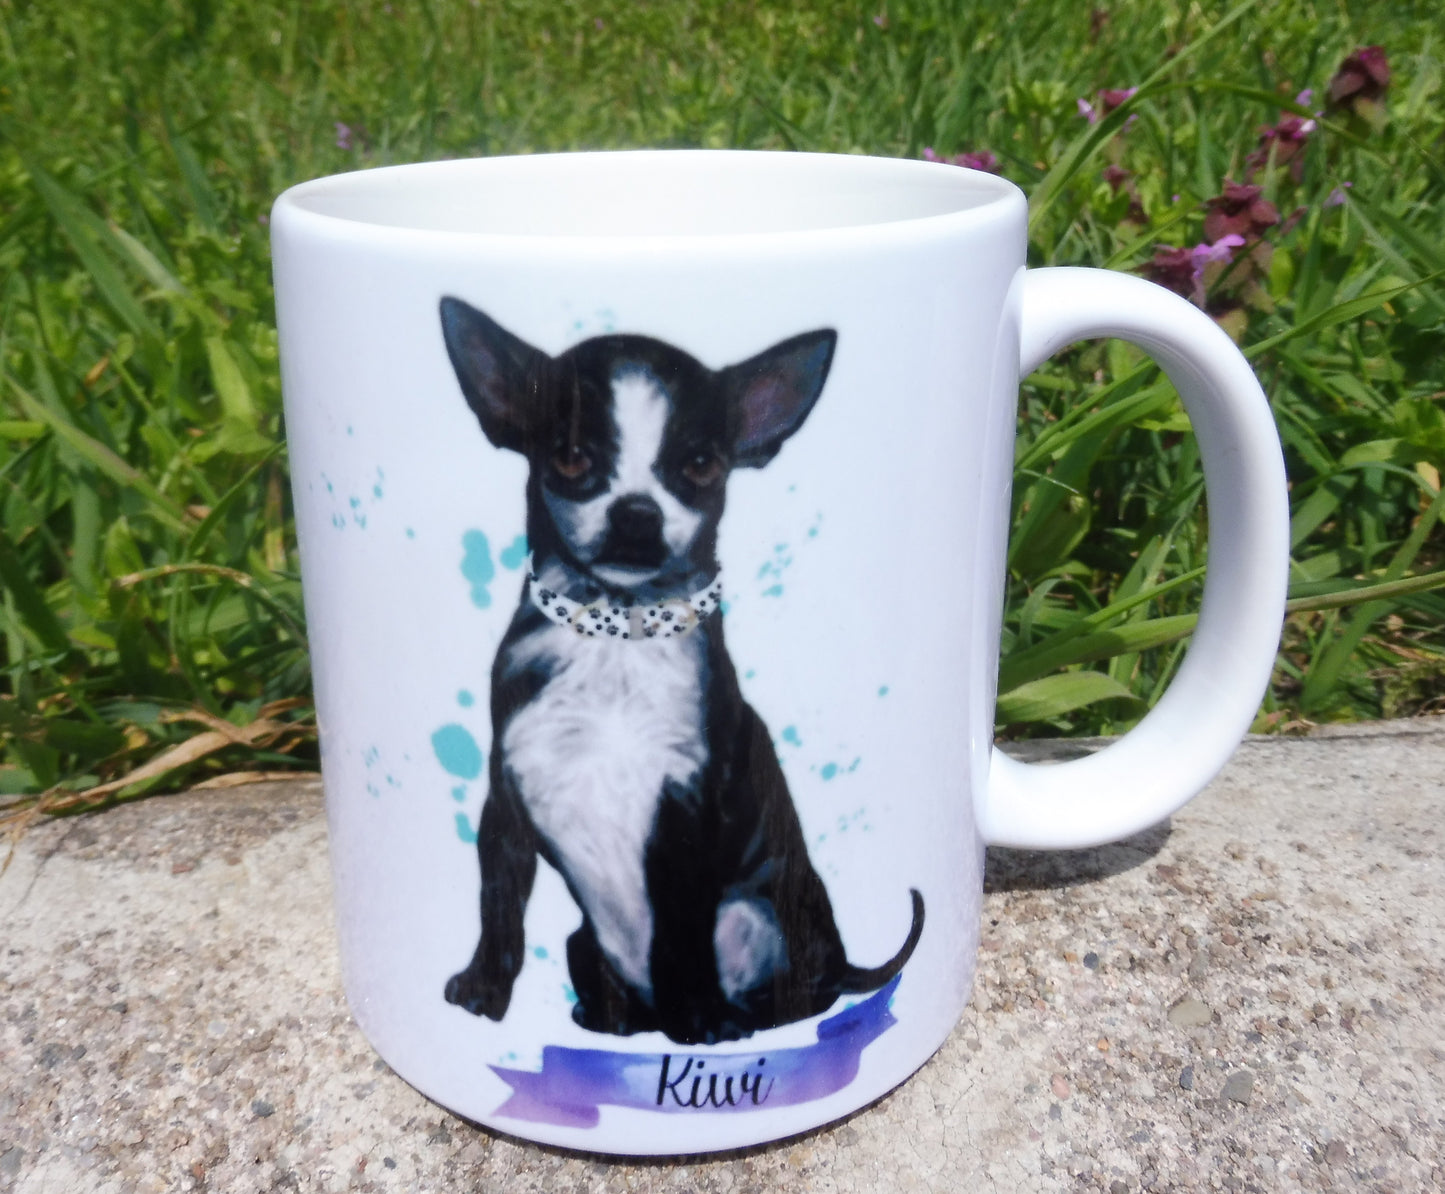 Personalized French Bulldog dog mug and his first name